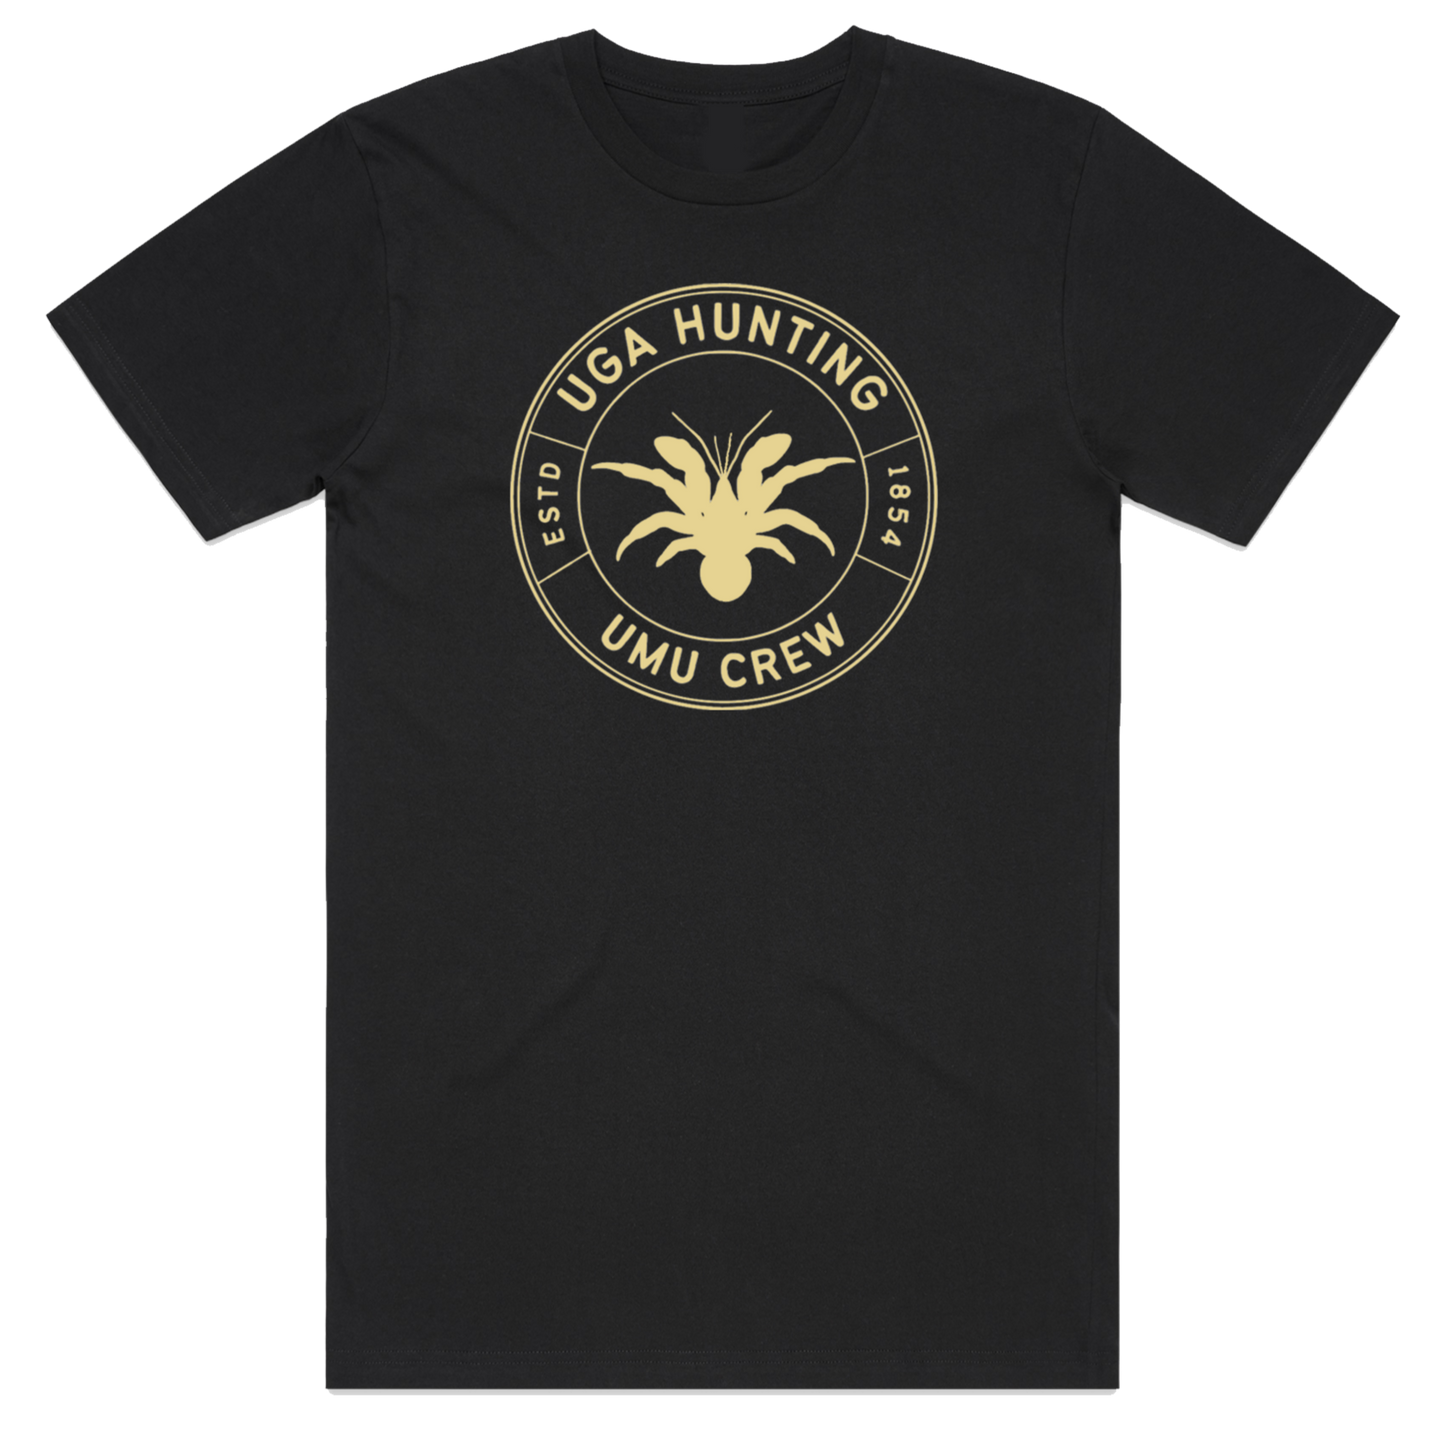 Uga hunting t-shirt design. part of the umu crew collection. gold design on a black t-shirt. features a coconut crab or Uga in Niue.